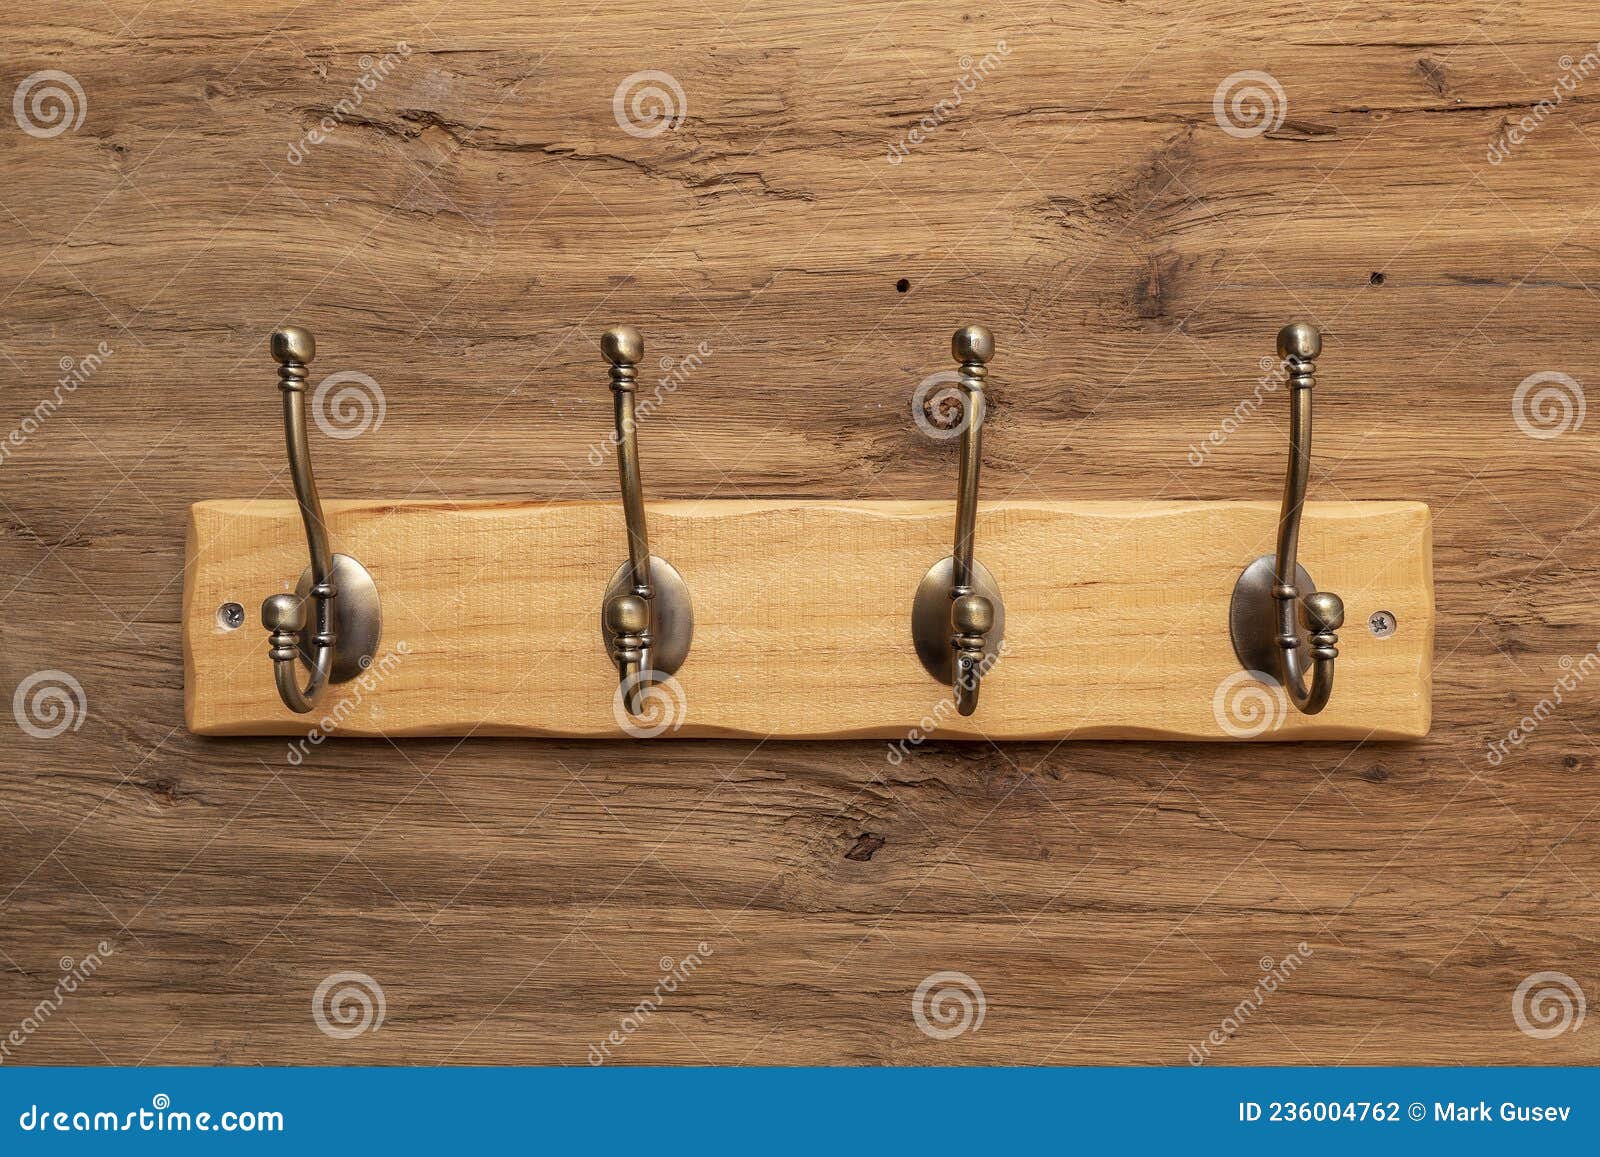 Bronze Metal Hooks for Hanging Clothes Attached To a Wooden Wall. Simple  Design Element Stock Photo - Image of hanging, real: 236004762